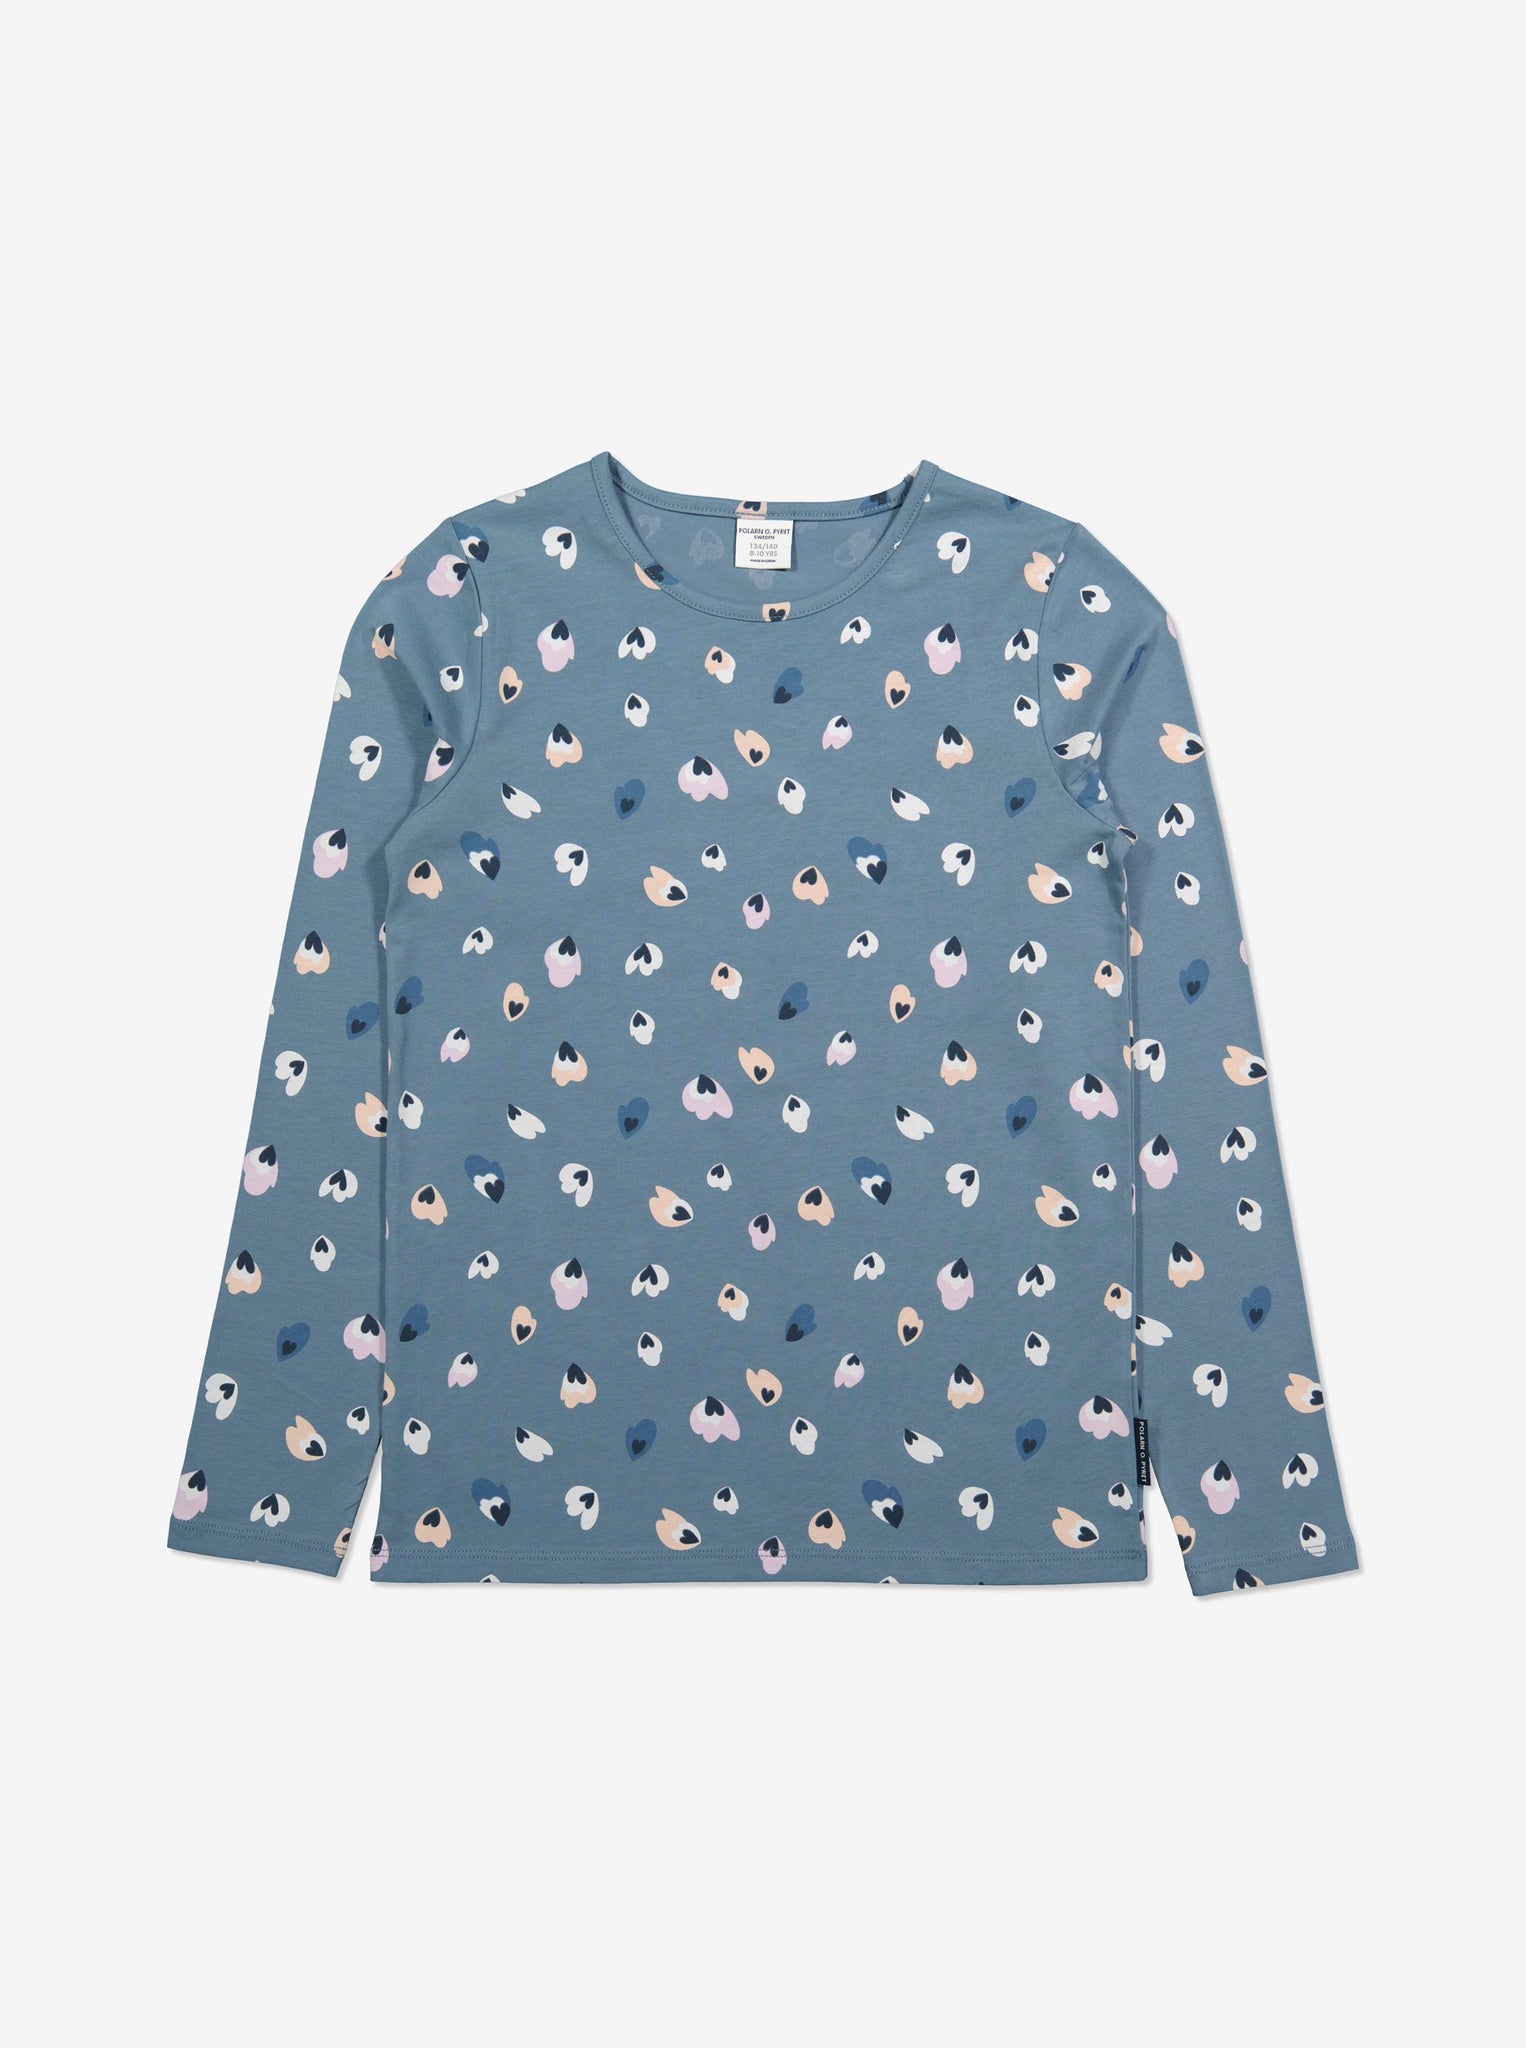  Blue Heart Print Girls Top from Polarn O. Pyret Kidswear. Made from soft organic cotton.